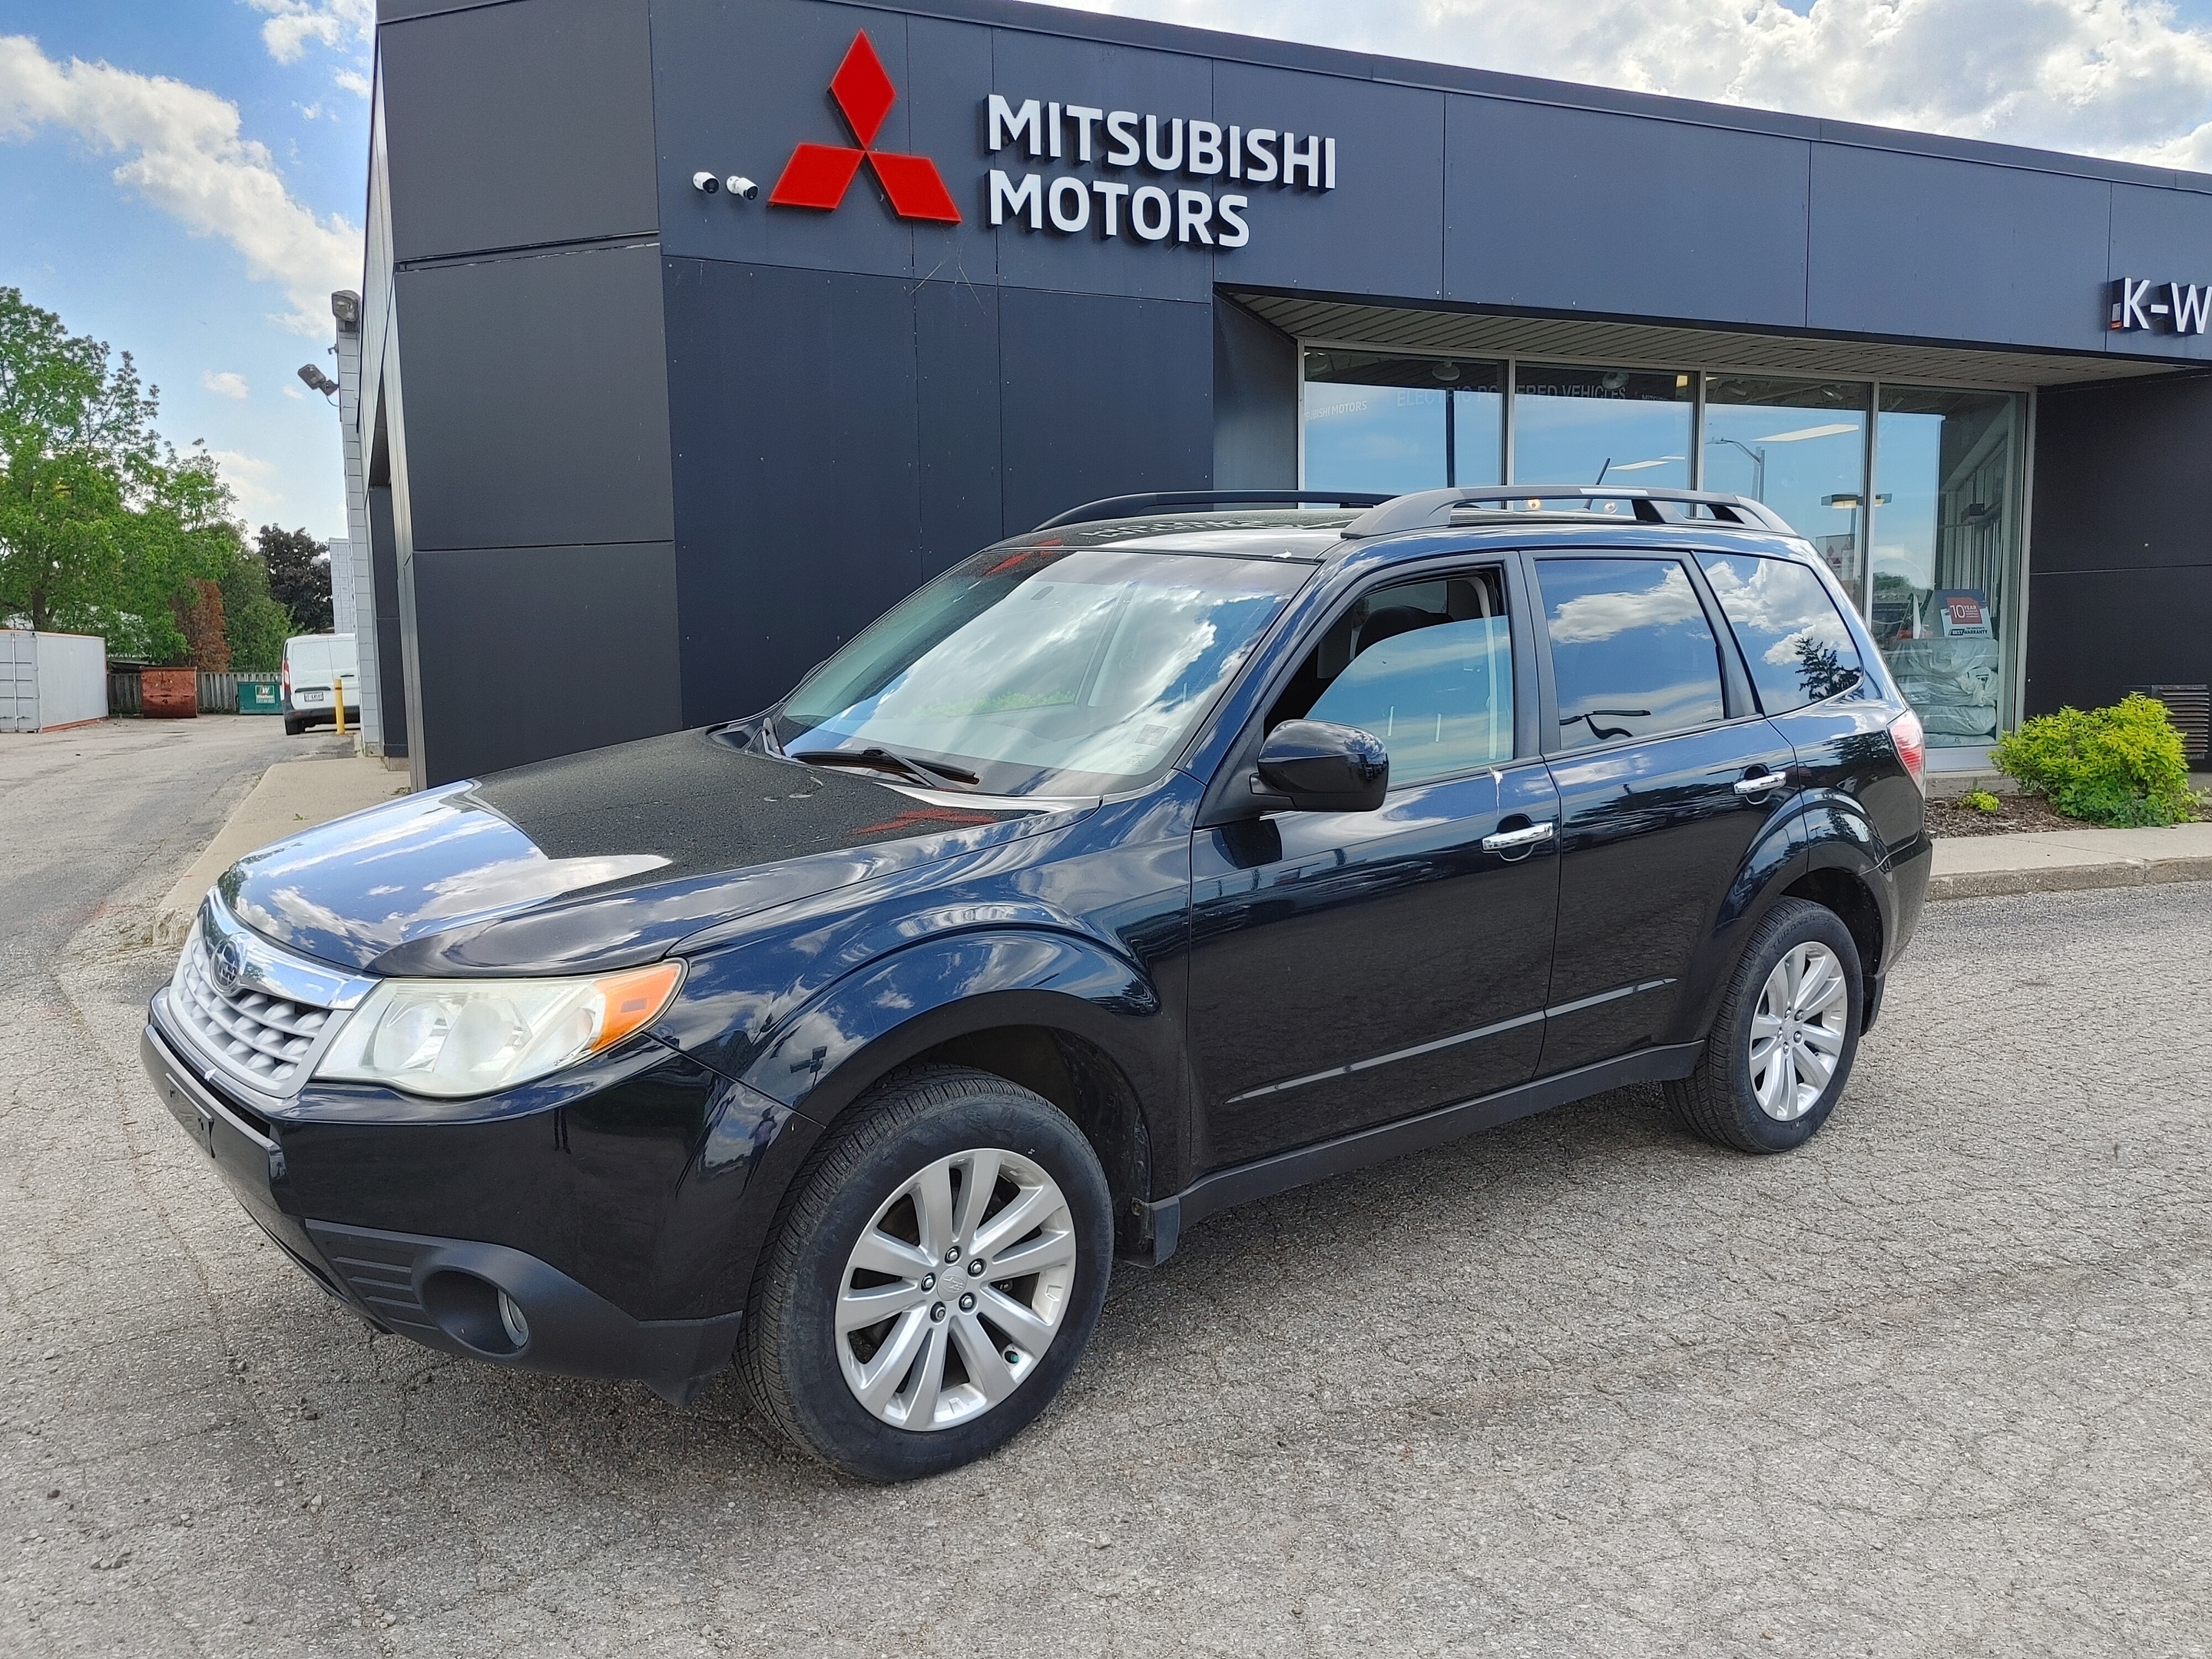 2011 Subaru Forester 5dr Wgn Auto 2.5X Limited